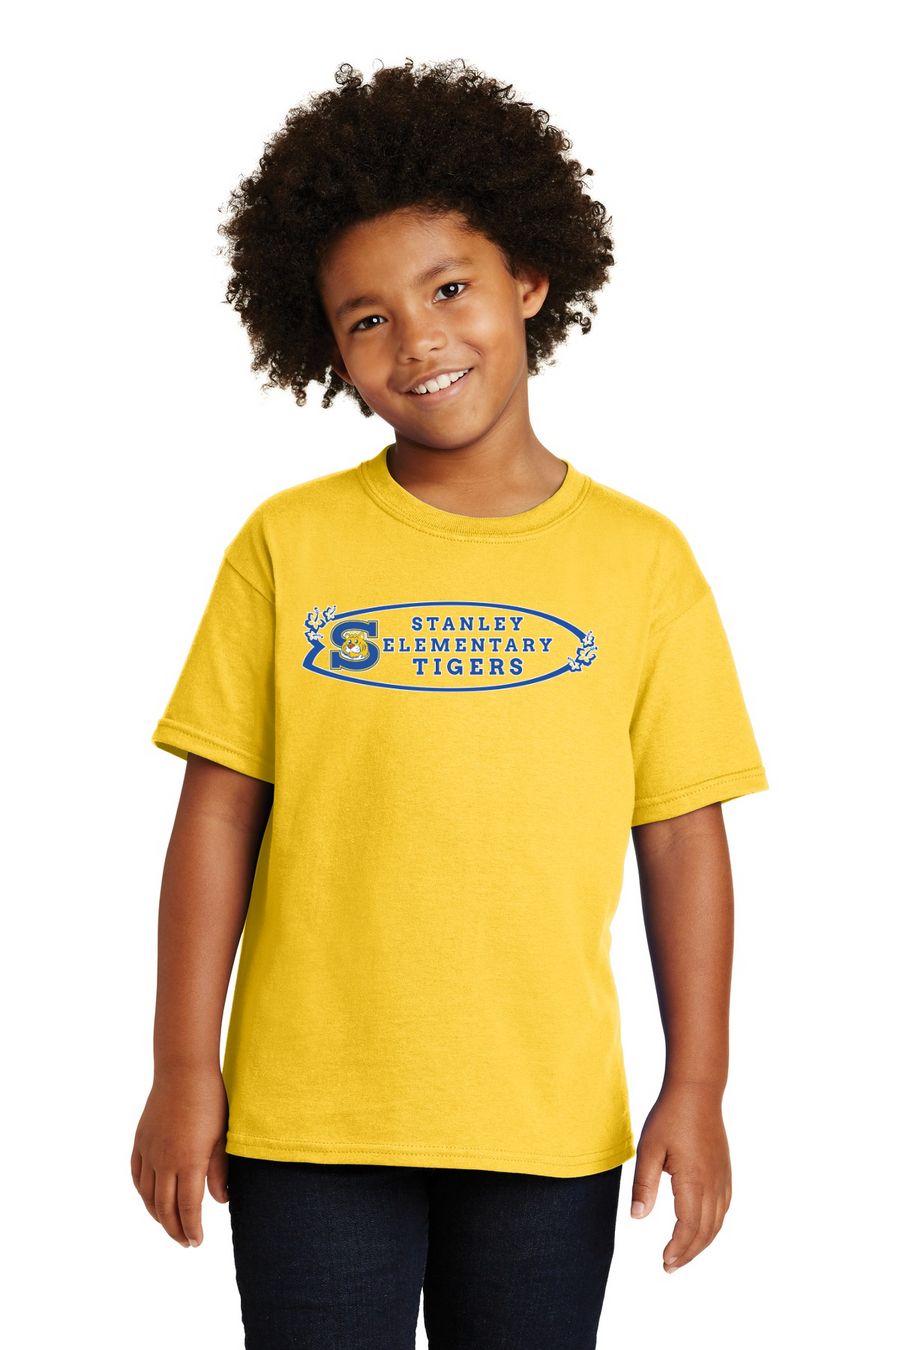 The Tiger Store - Stanley Elementary 2023/24-Unisex T-Shirt Surf Board Logo